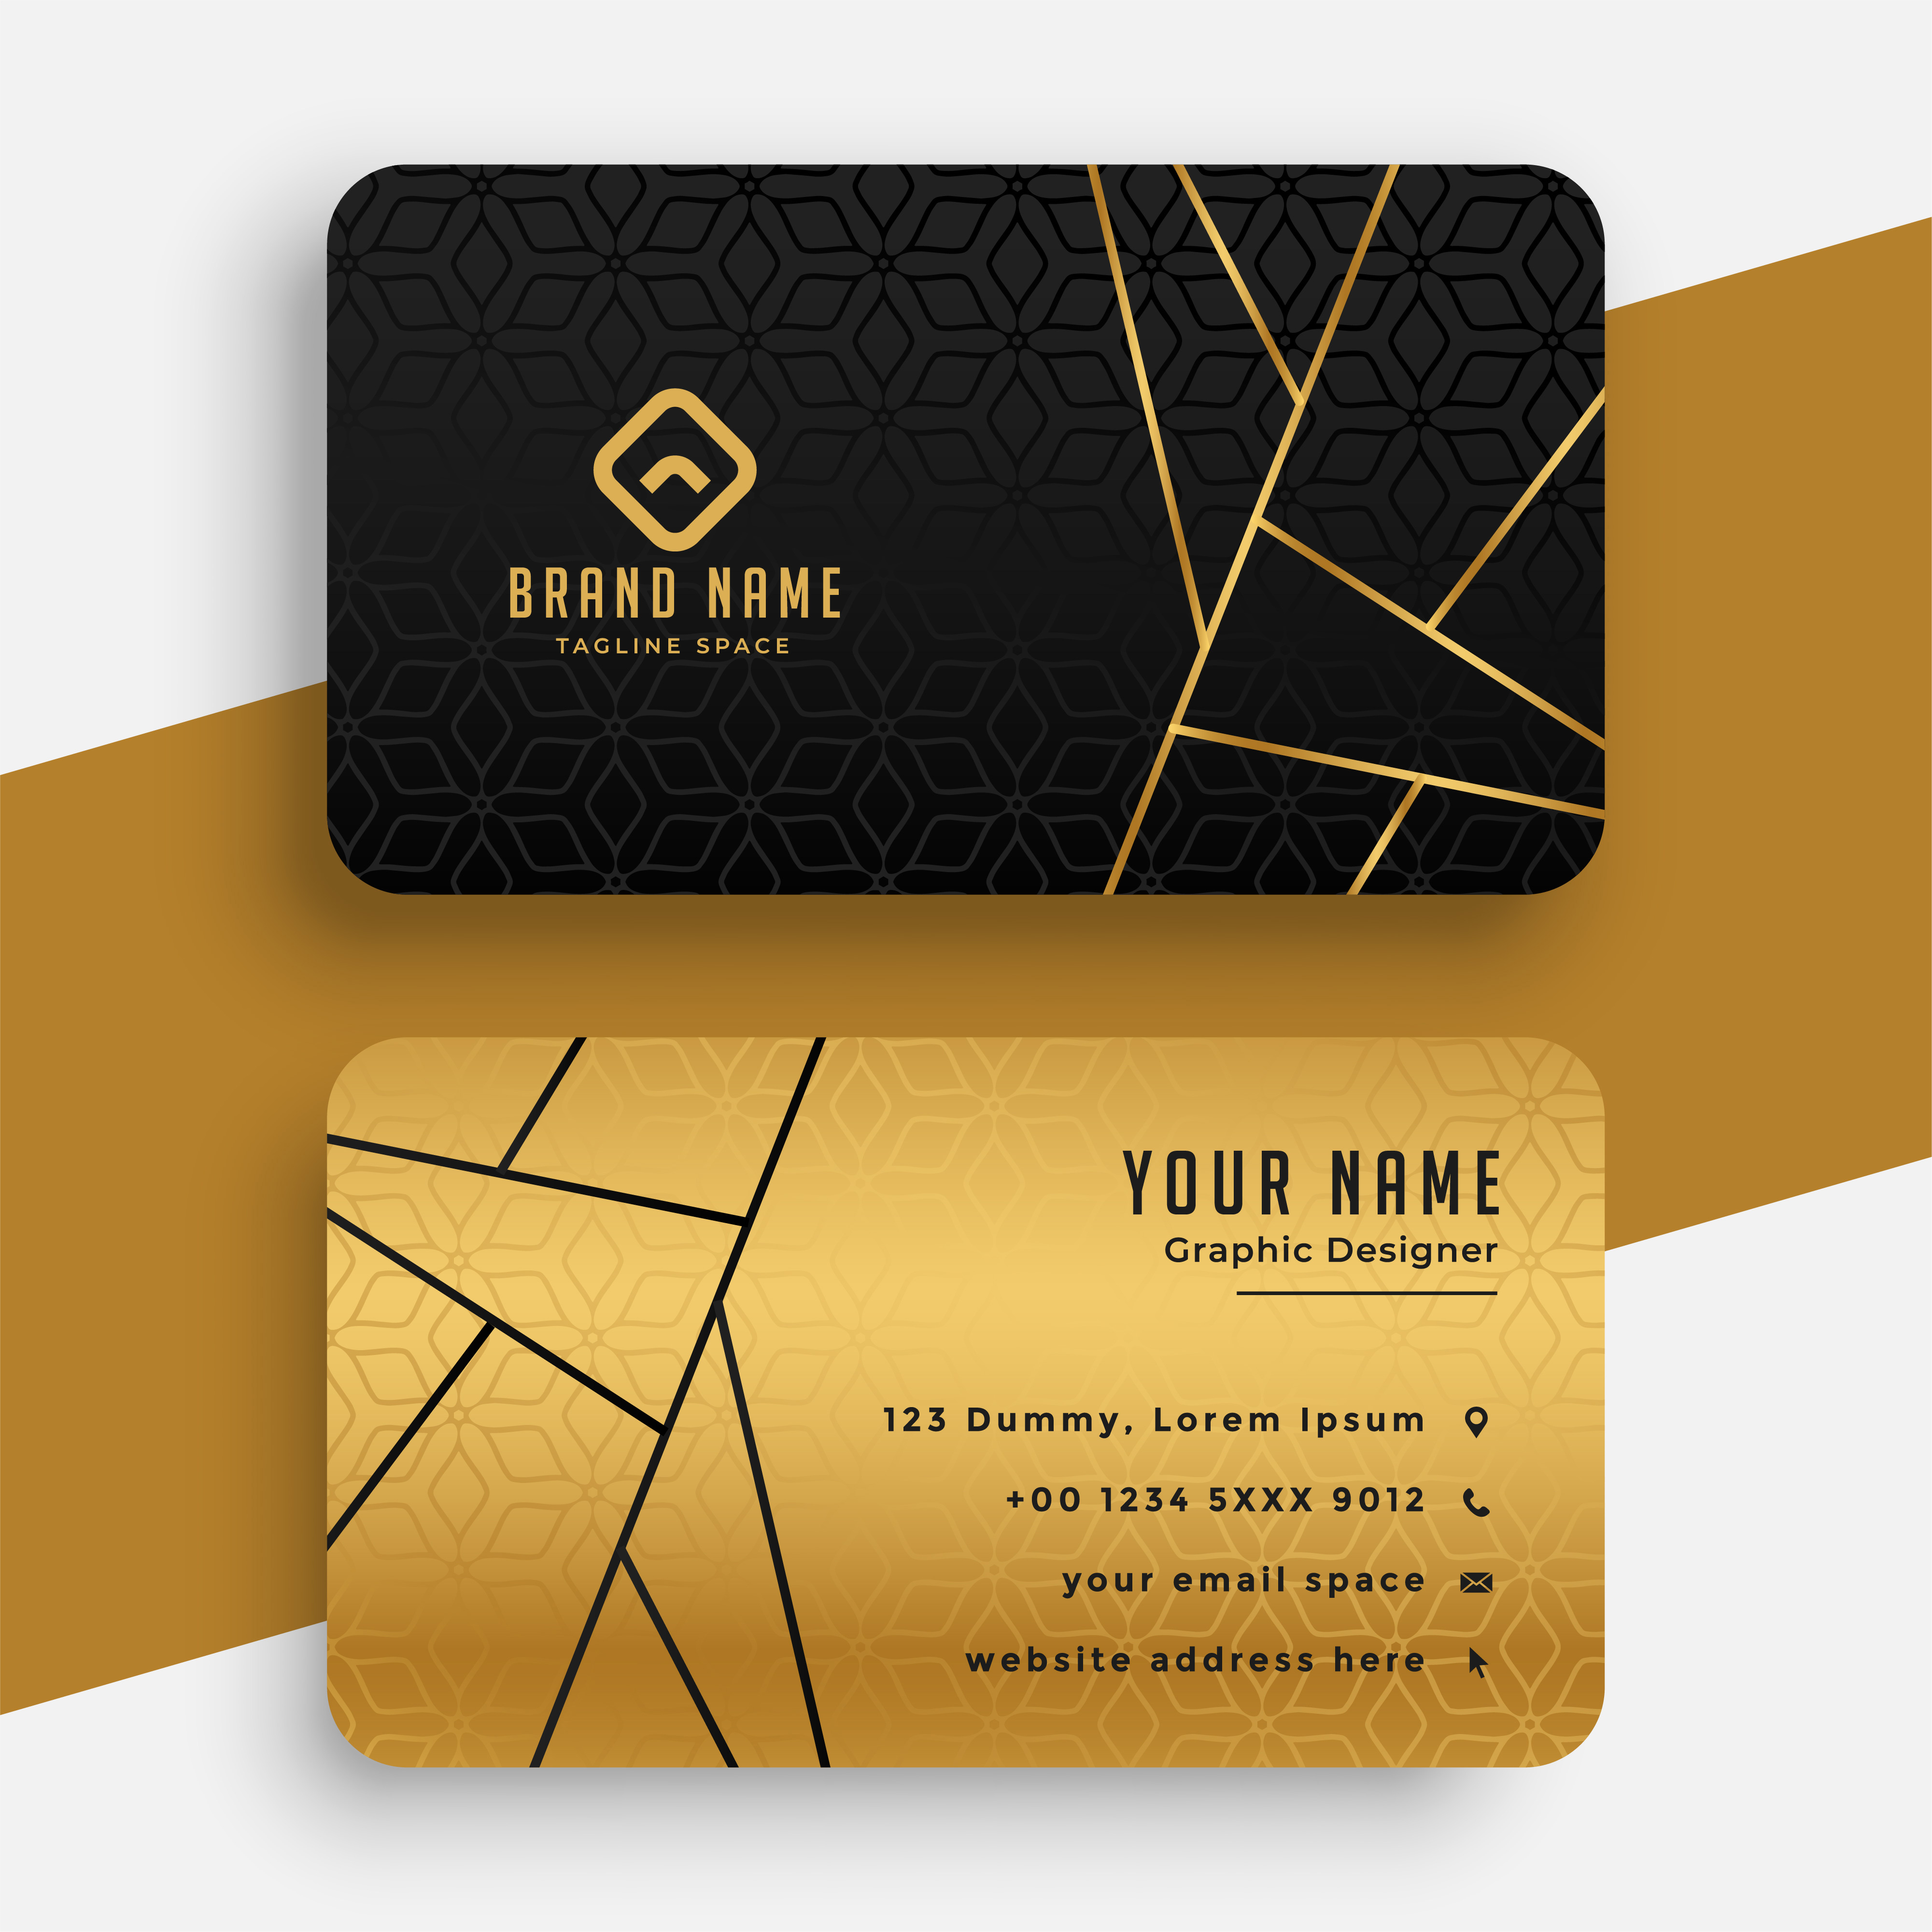 I will create modern luxury business card and redesign for $1 - SEOClerks